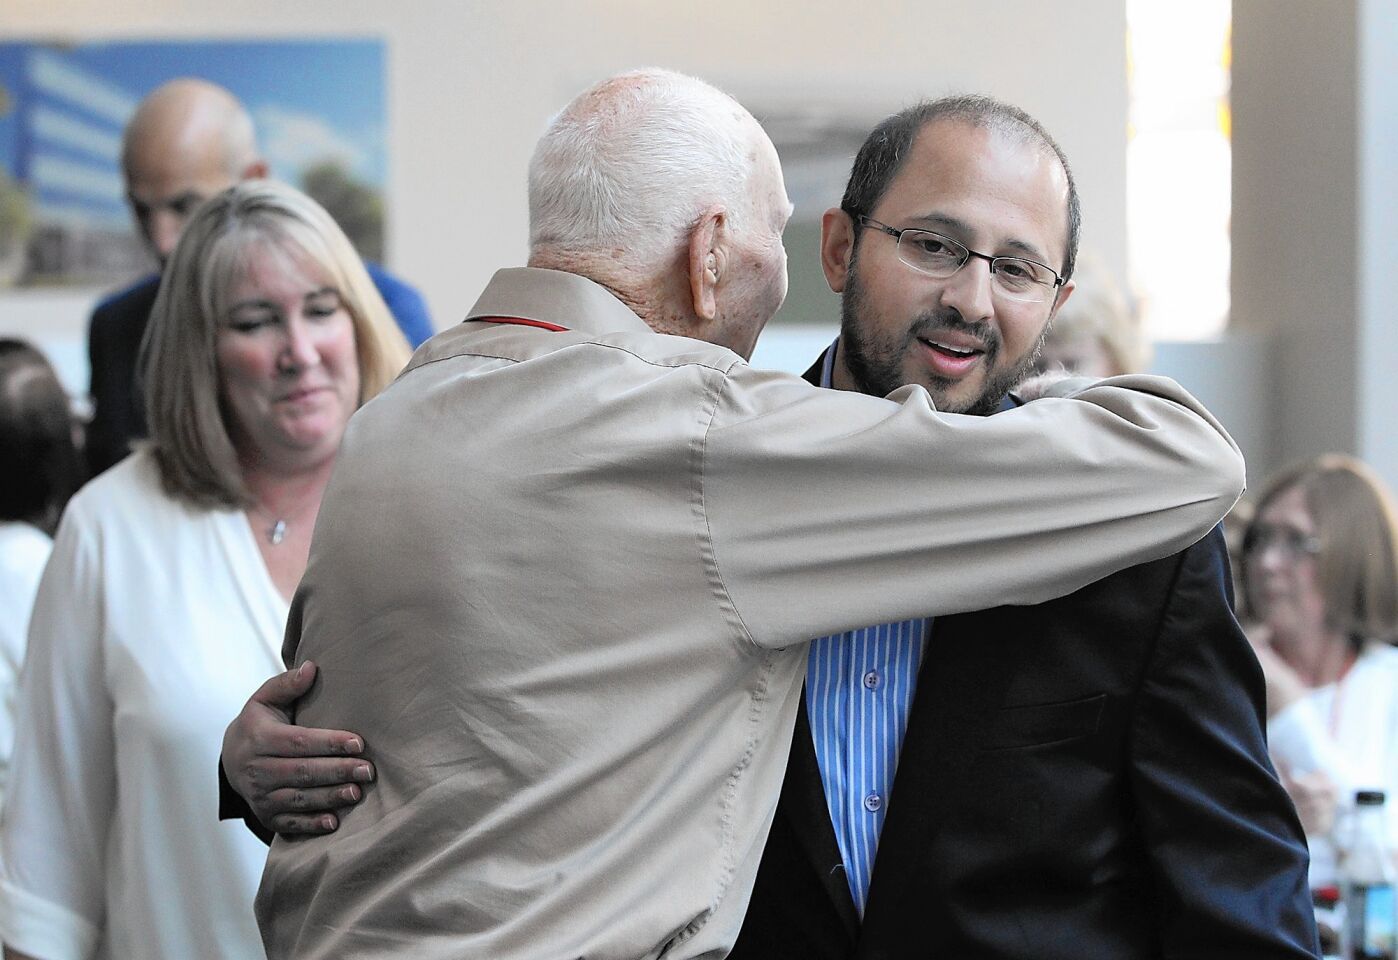 Cardiologist Salman Azam, right, greets his patient Lloyd Spencer during Edward Lifesciences Patient Day on Friday in Irvine. Nurse Susan Robinson, who helped on the surgery, is at far left. Spencer received a transcatheter heart valve.